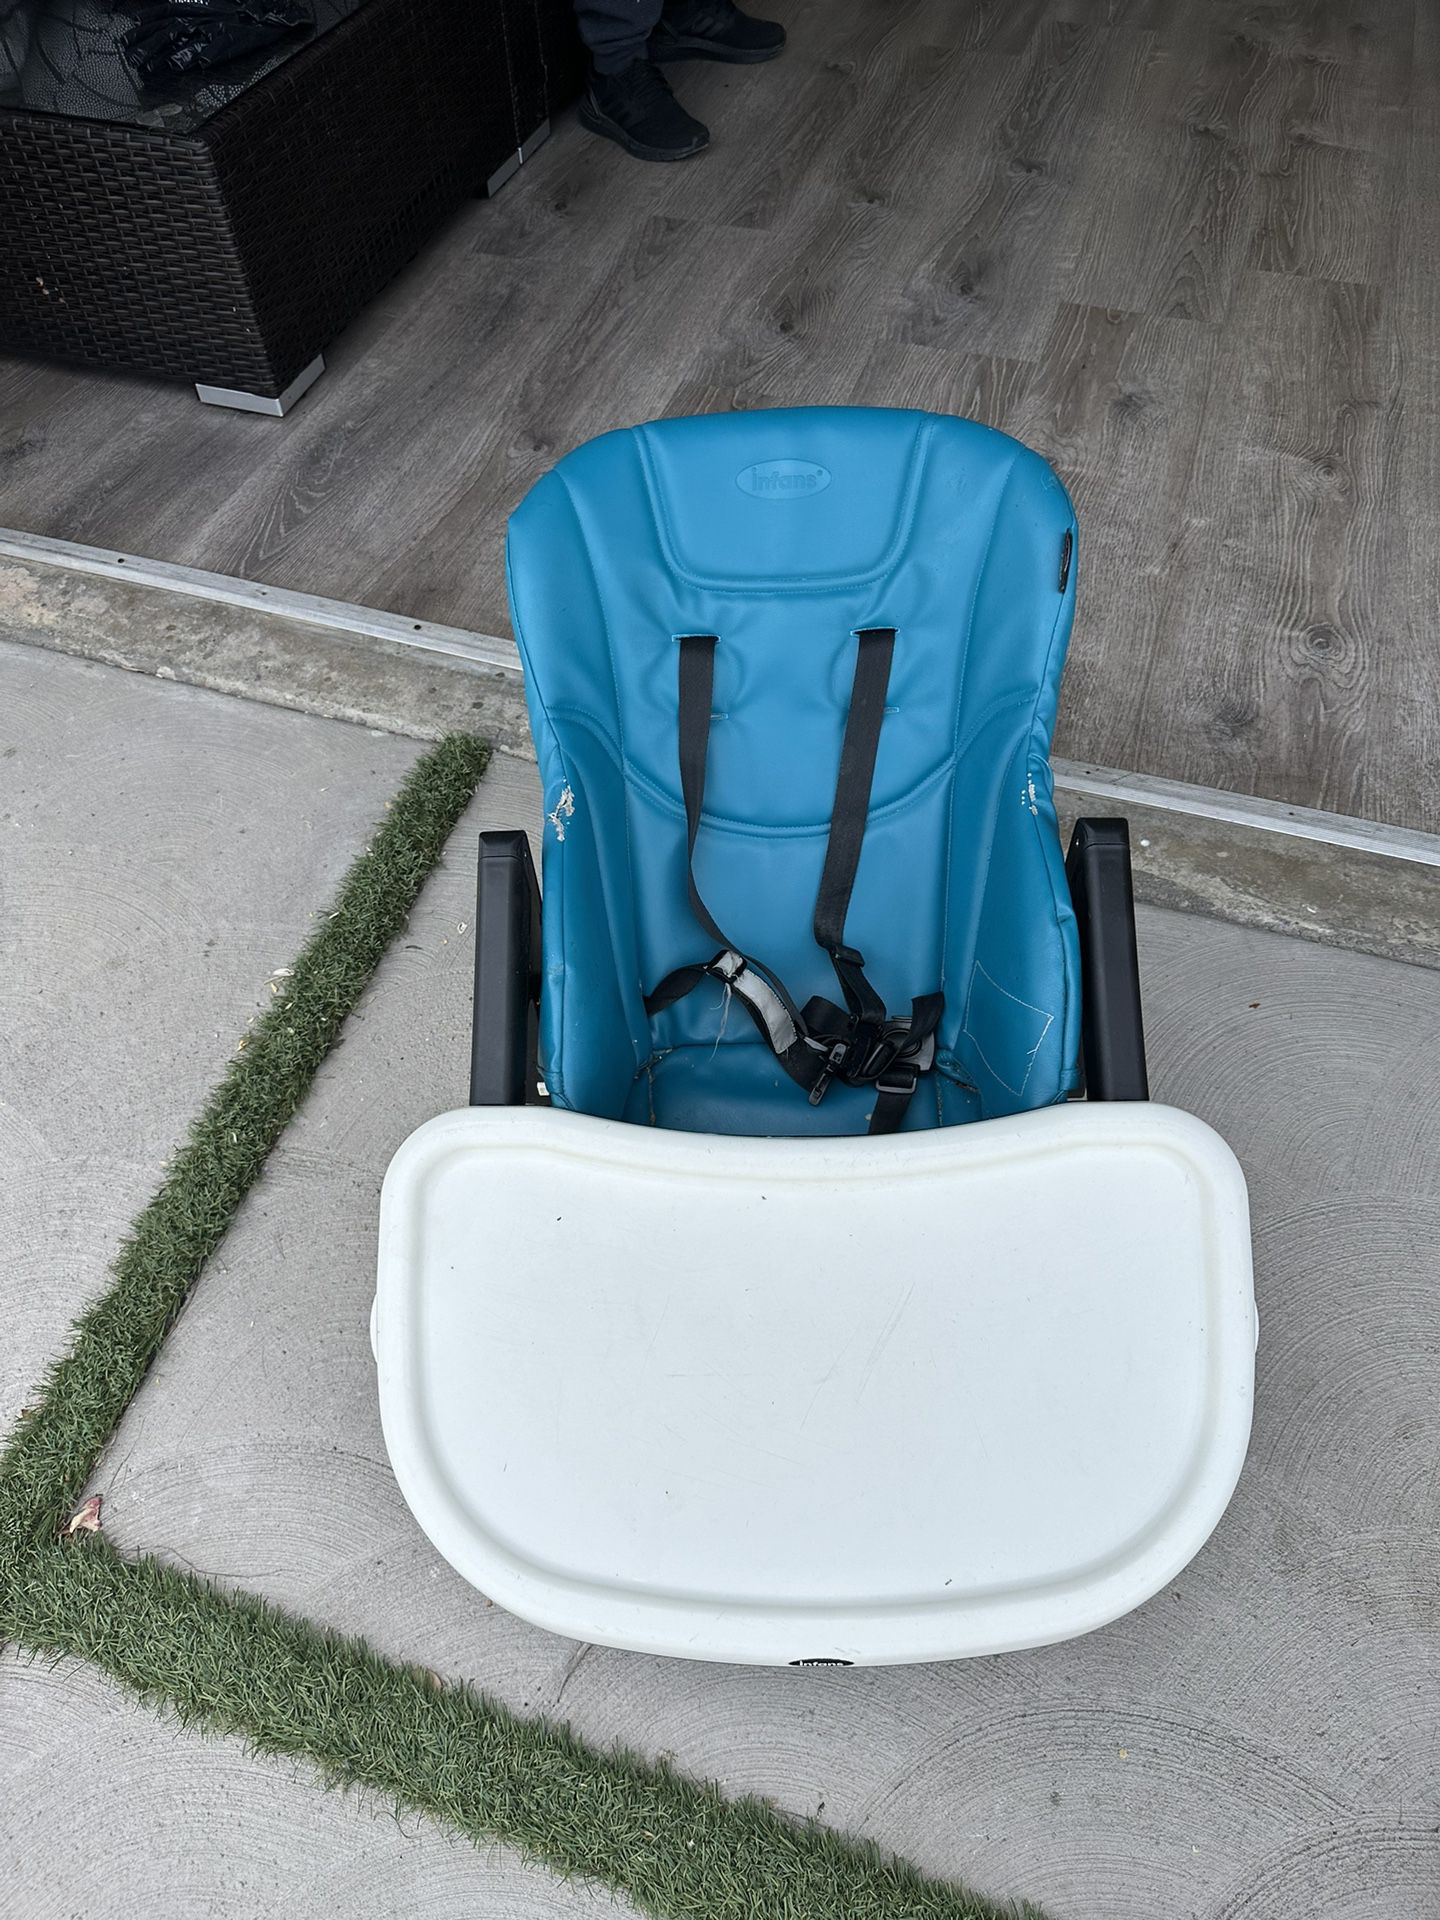 Infans Baby Seat Feeder Infant